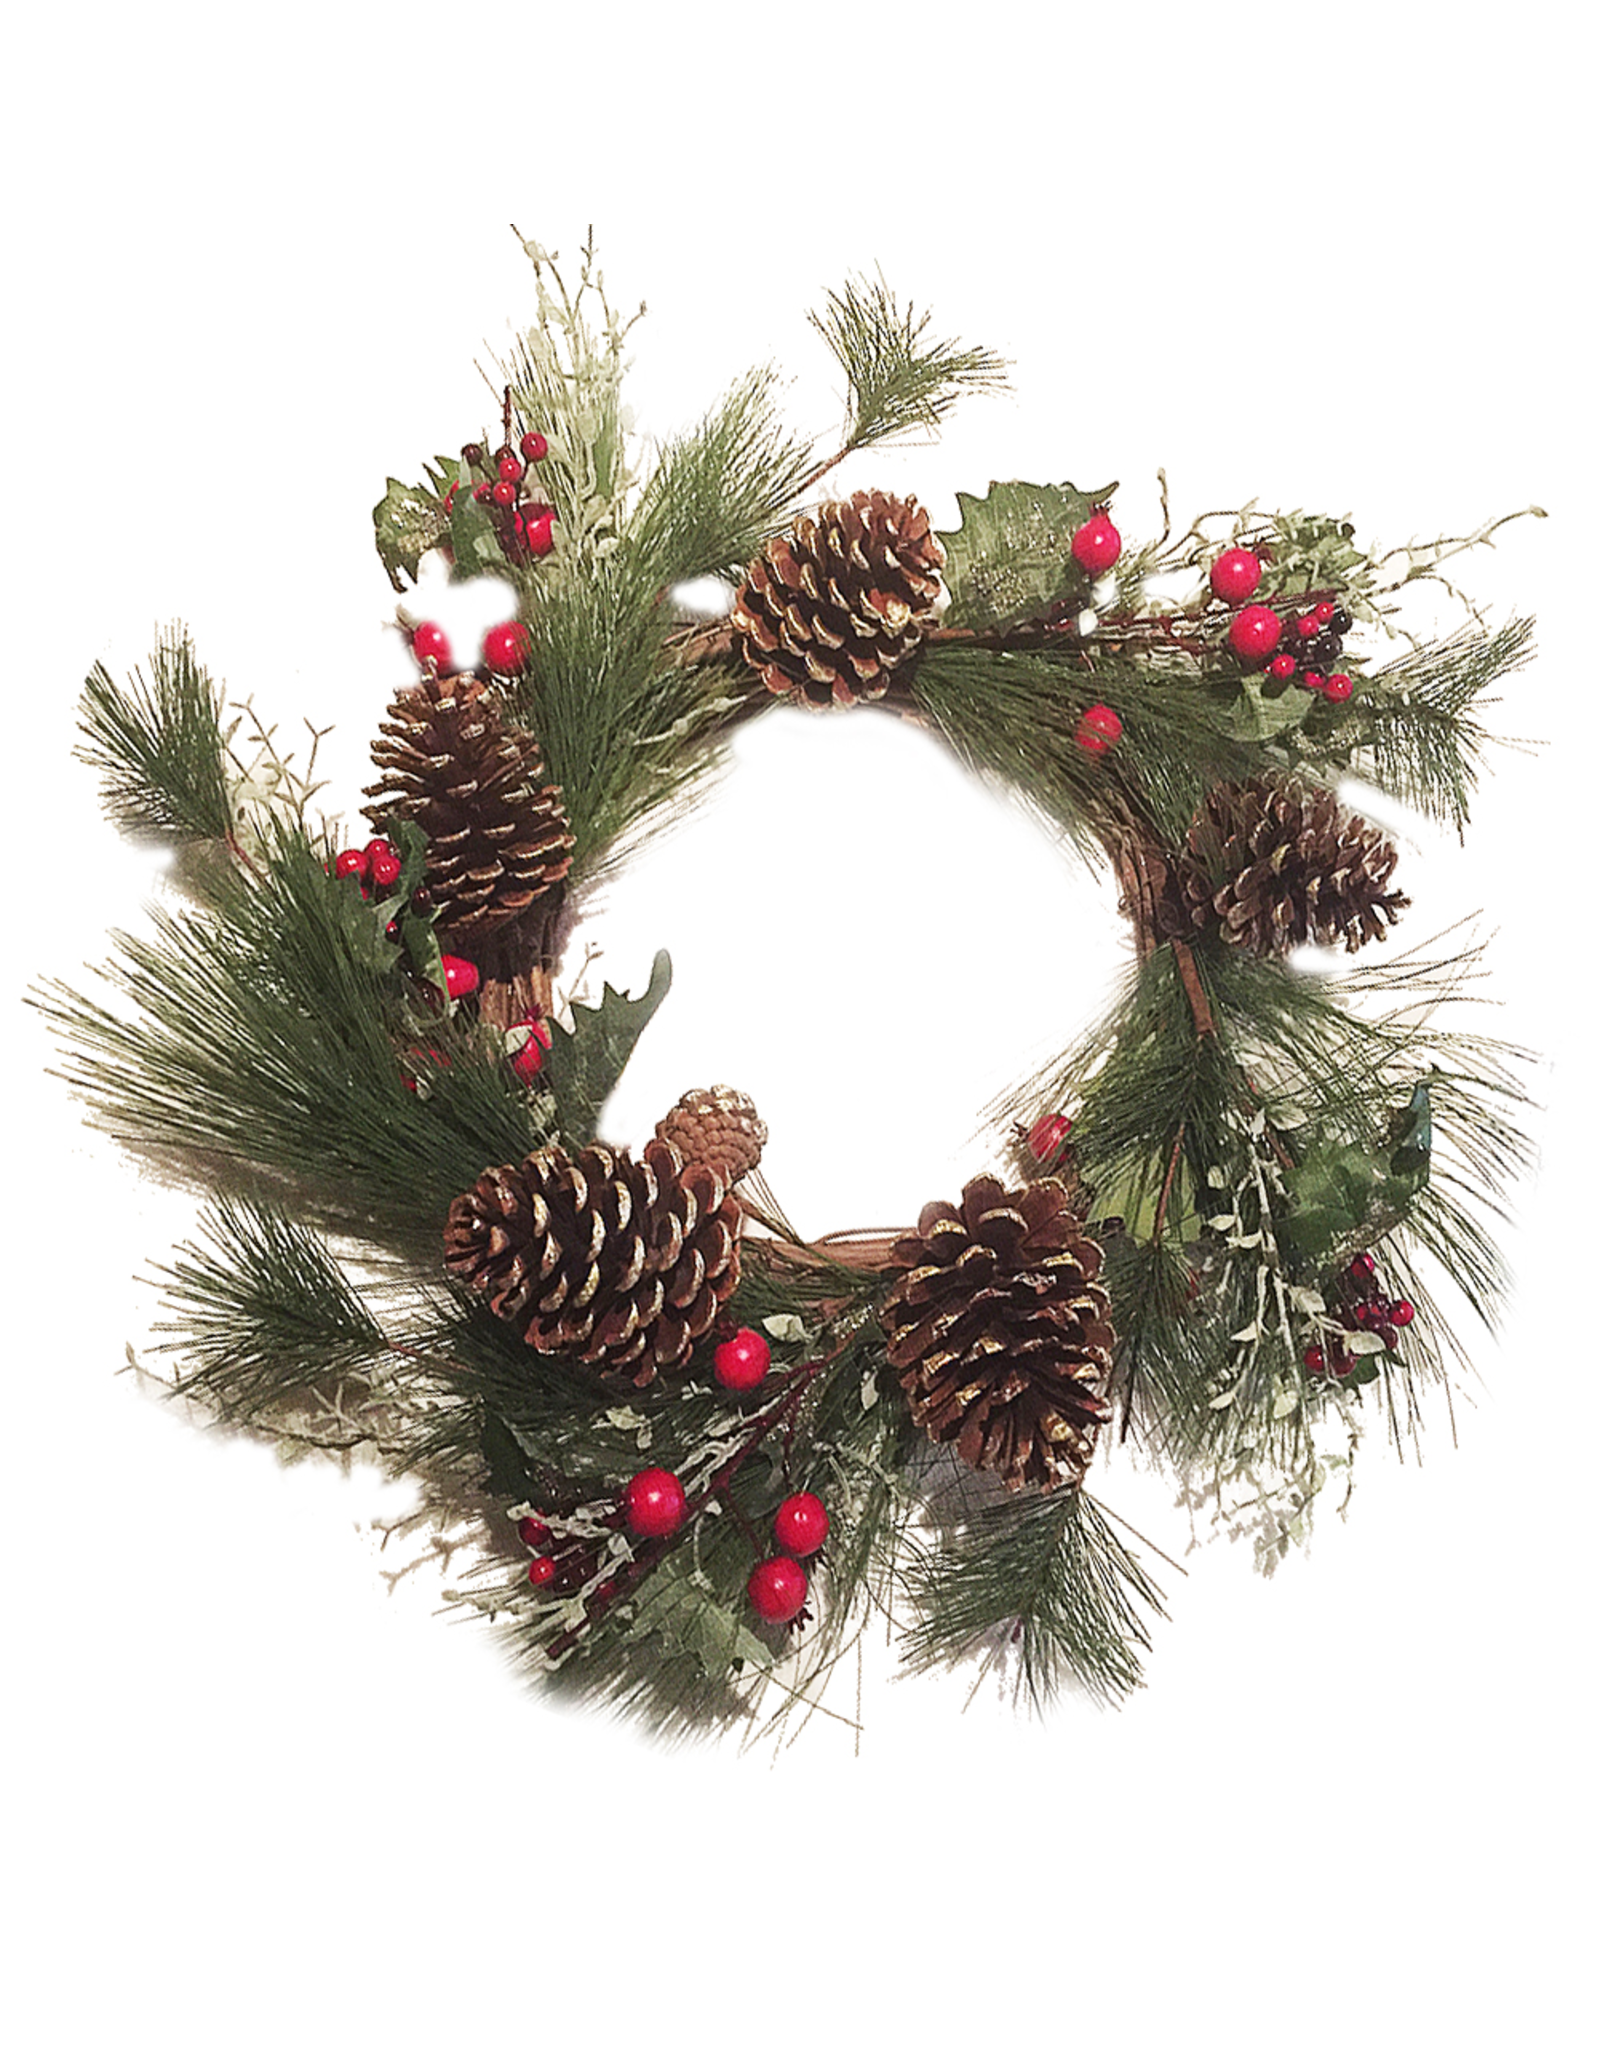 Darice Christmas Wreath Pine Branches Pinecones w Red Berries